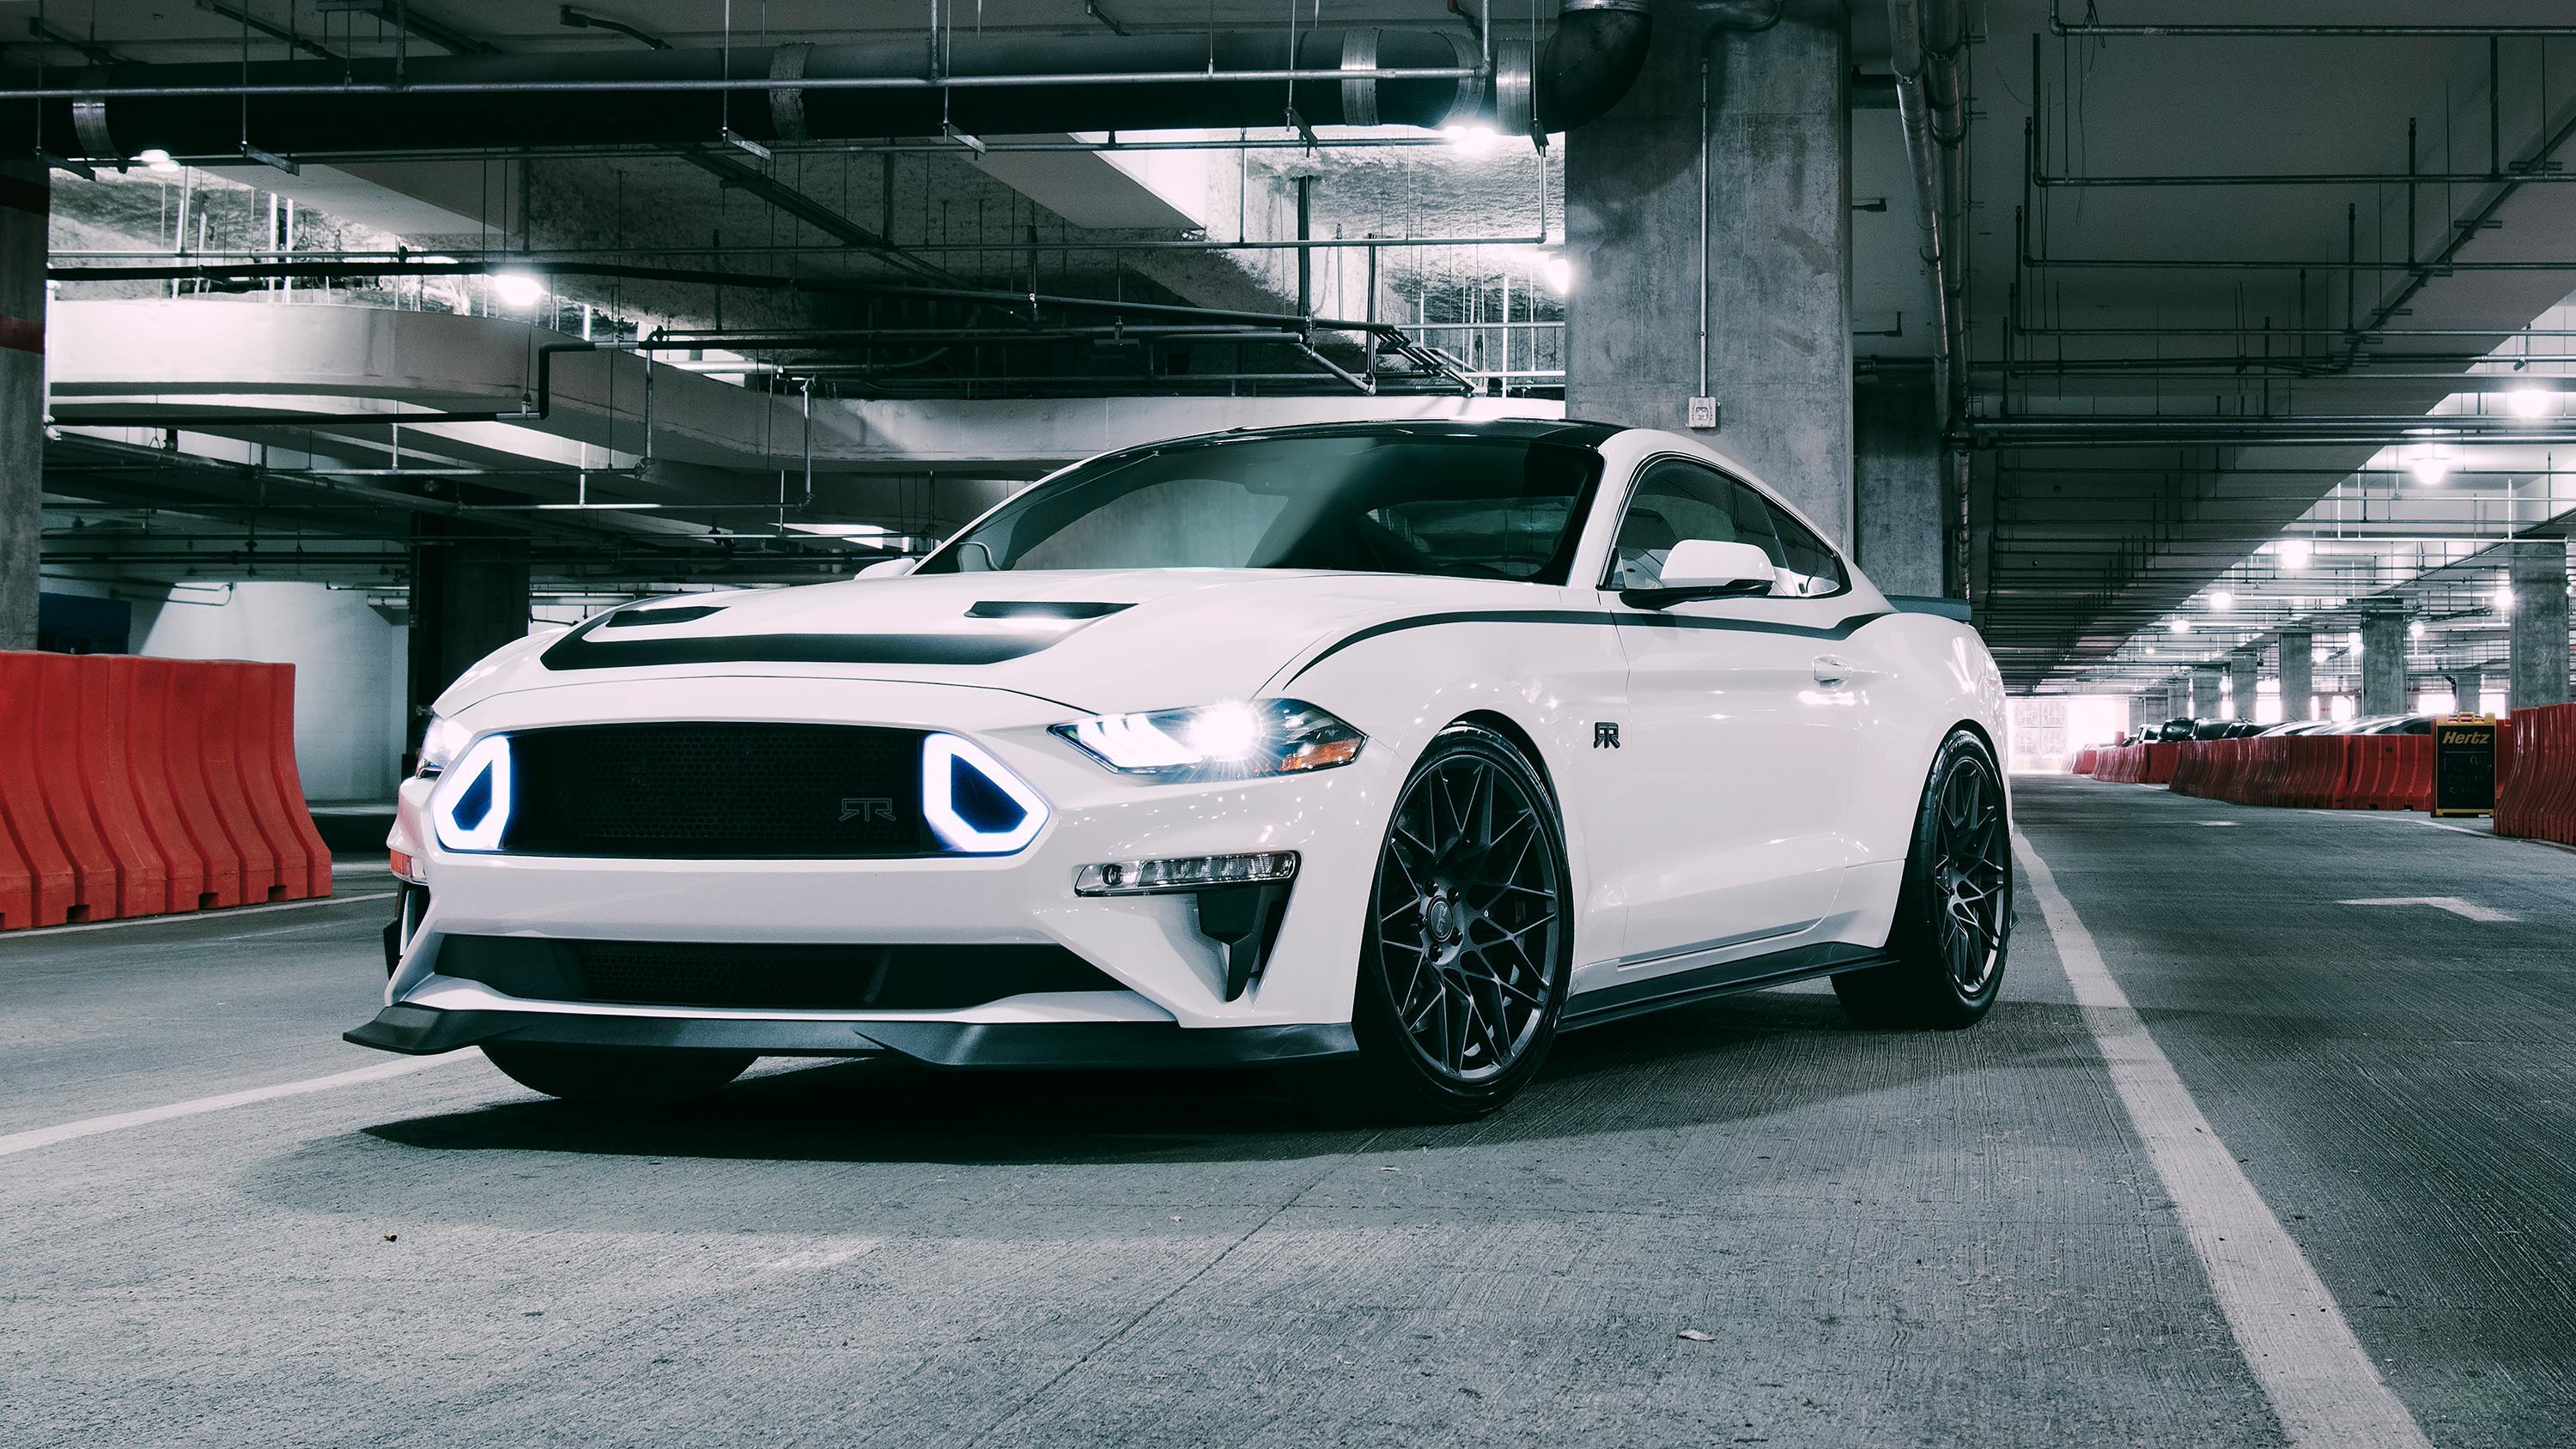 Rtr Mustang Wallpapers Wallpaper Cave Images, Photos, Reviews